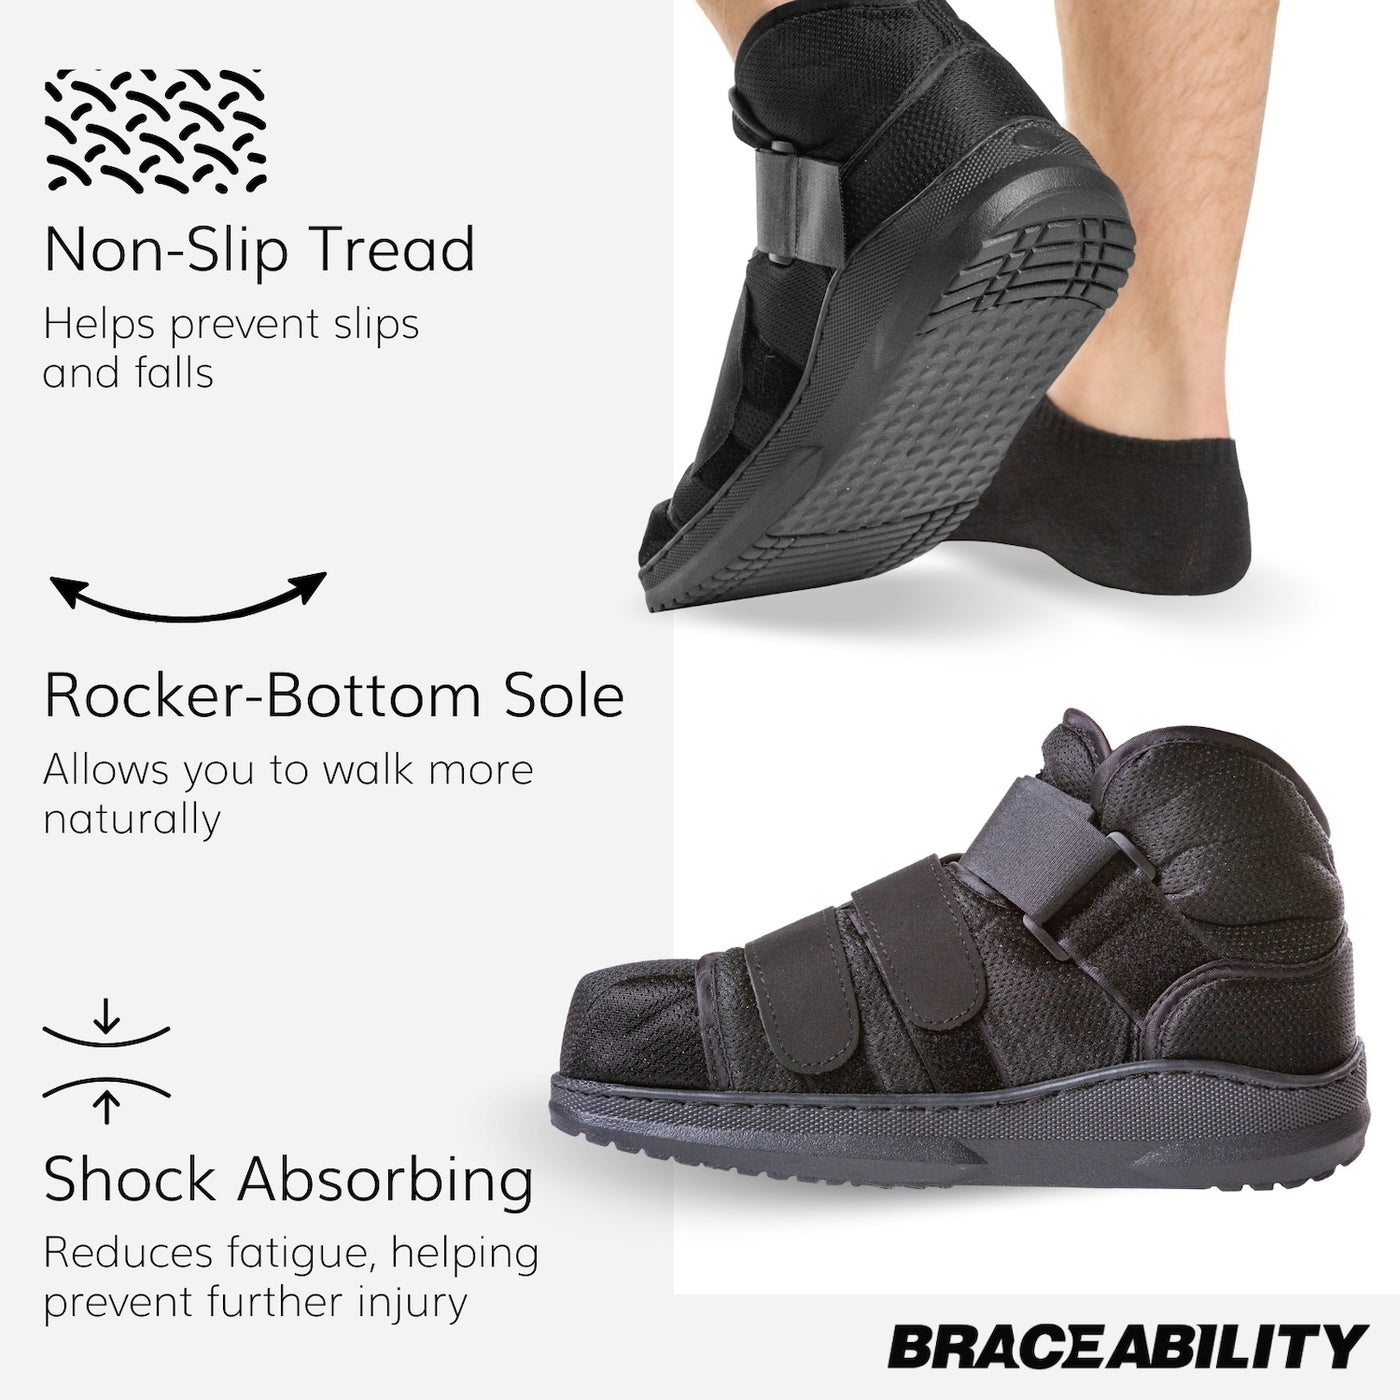 Our all weather metatarsal shoe has non-slip tread to help prevent falls and slips after foot stress fractures